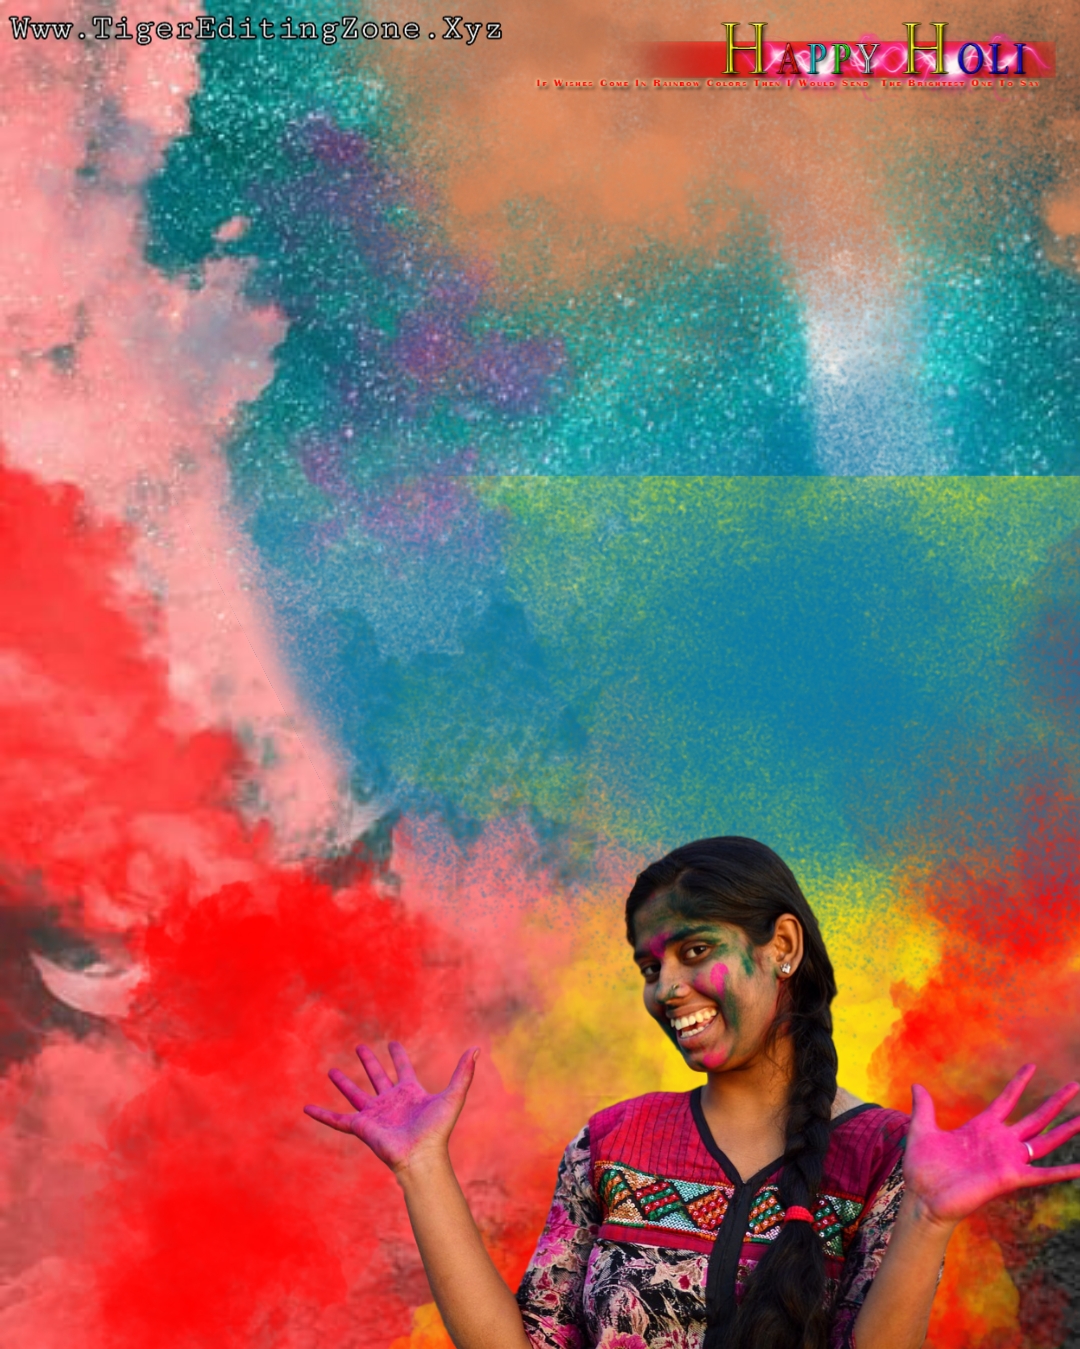 200+ Happy Holi Background Images HD For Editing | Holi Background Images for PicsArt 2021